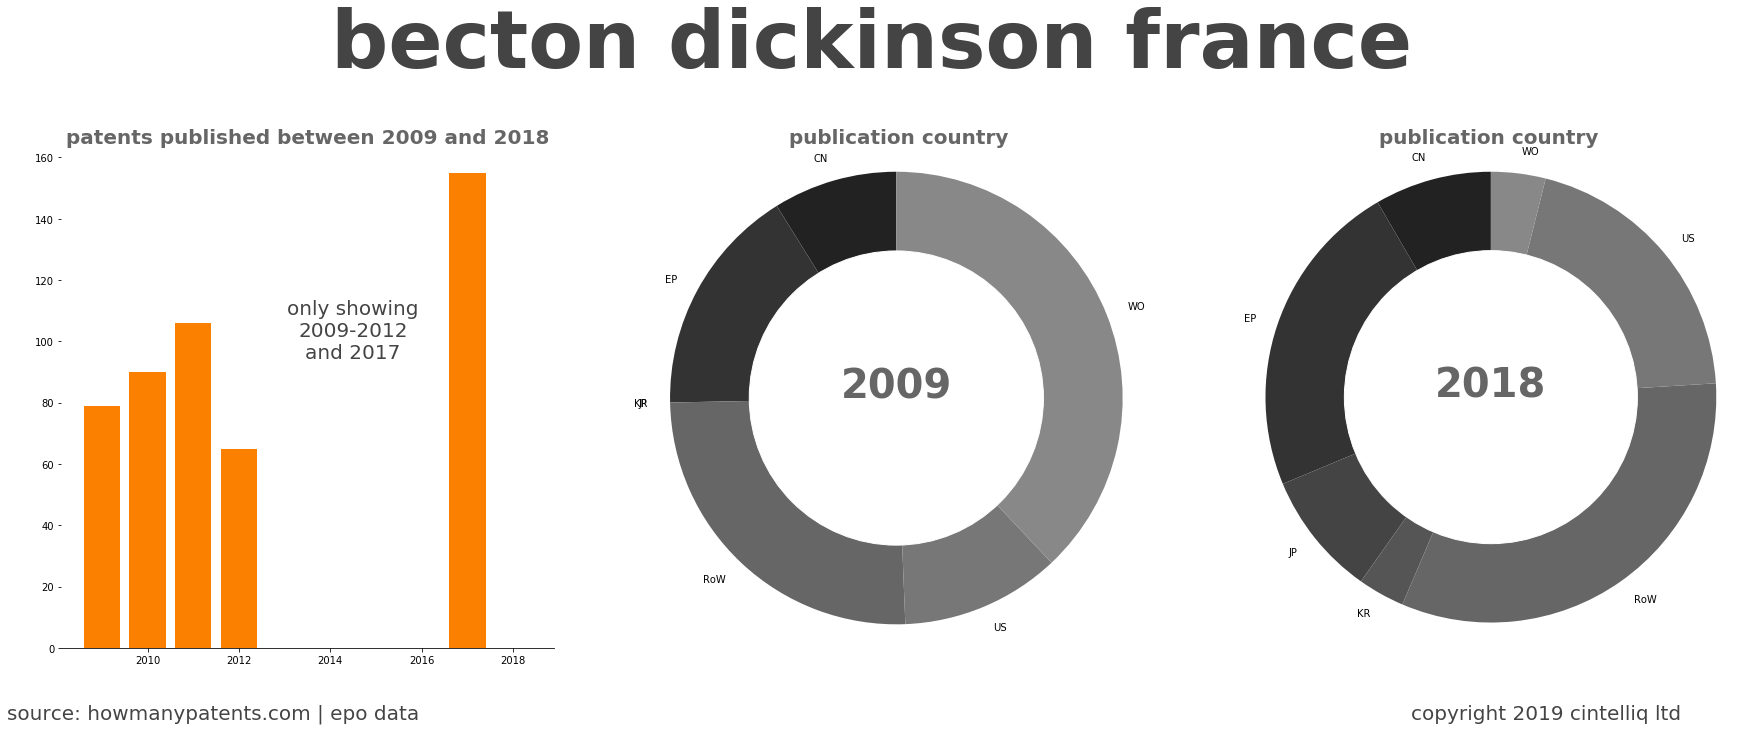 summary of patents for Becton Dickinson France